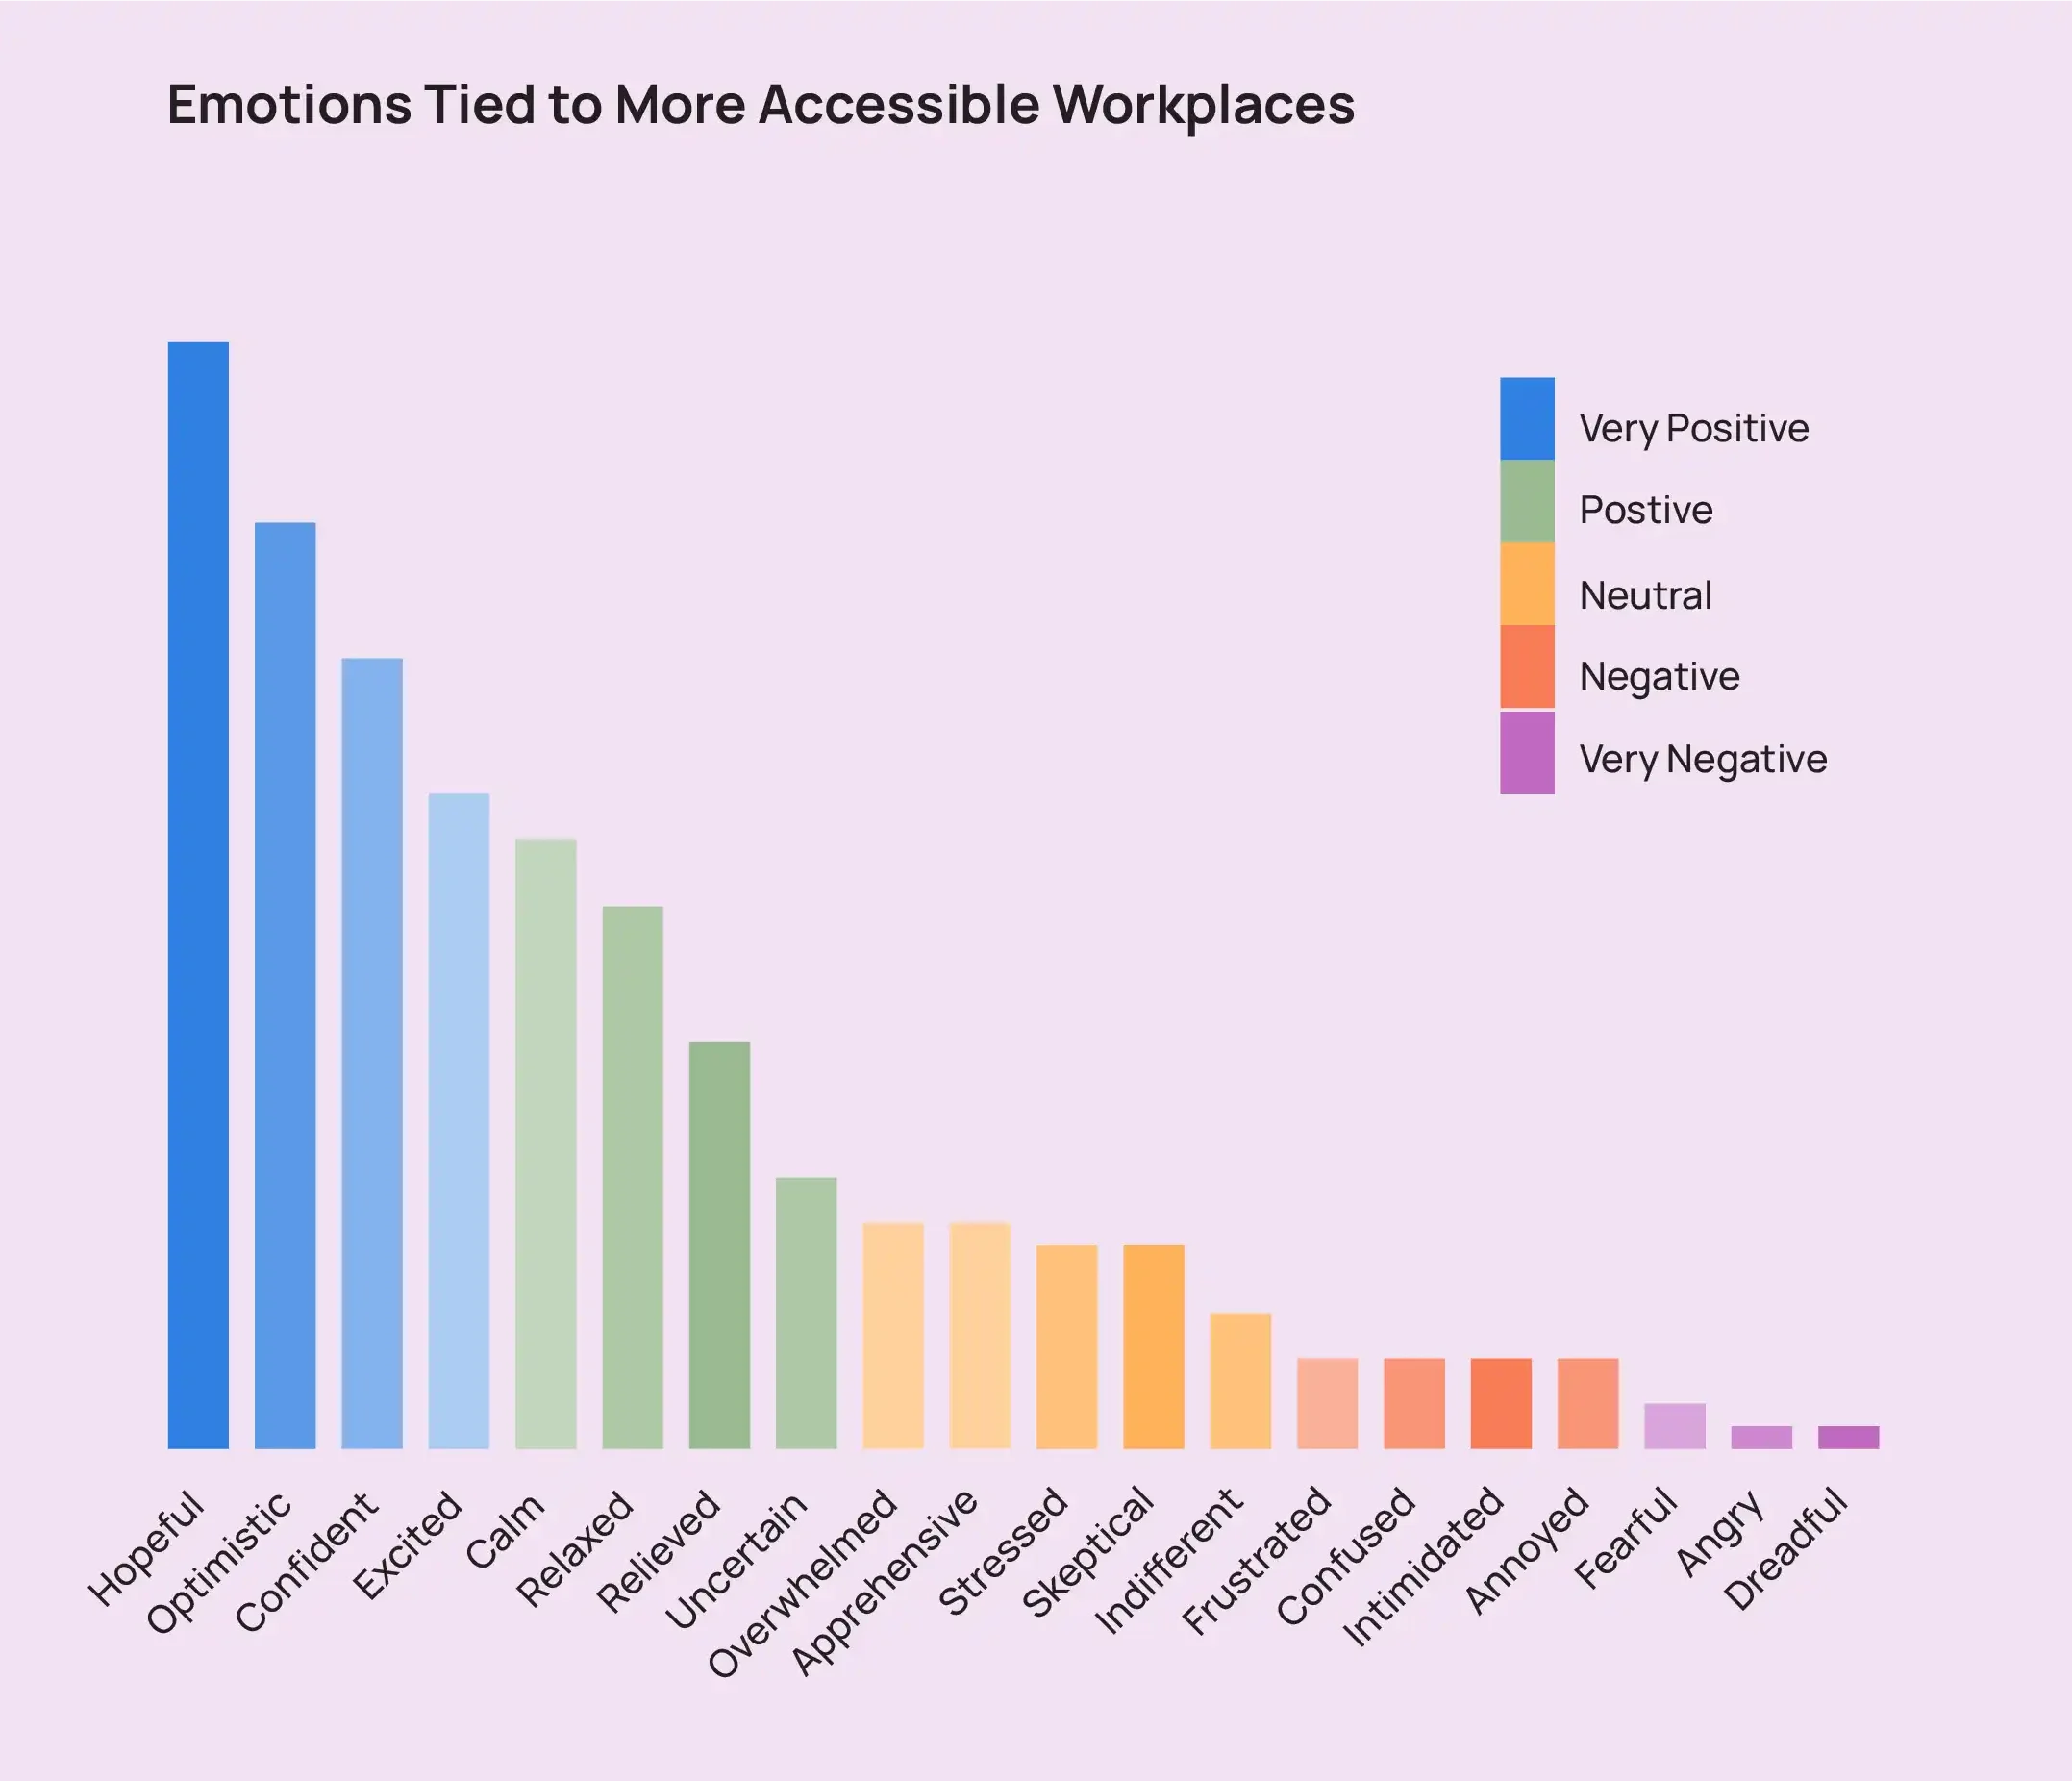 A bar graph showing the emotions tied to more accessible workplaces, including hopeful, optimistic, and confident.